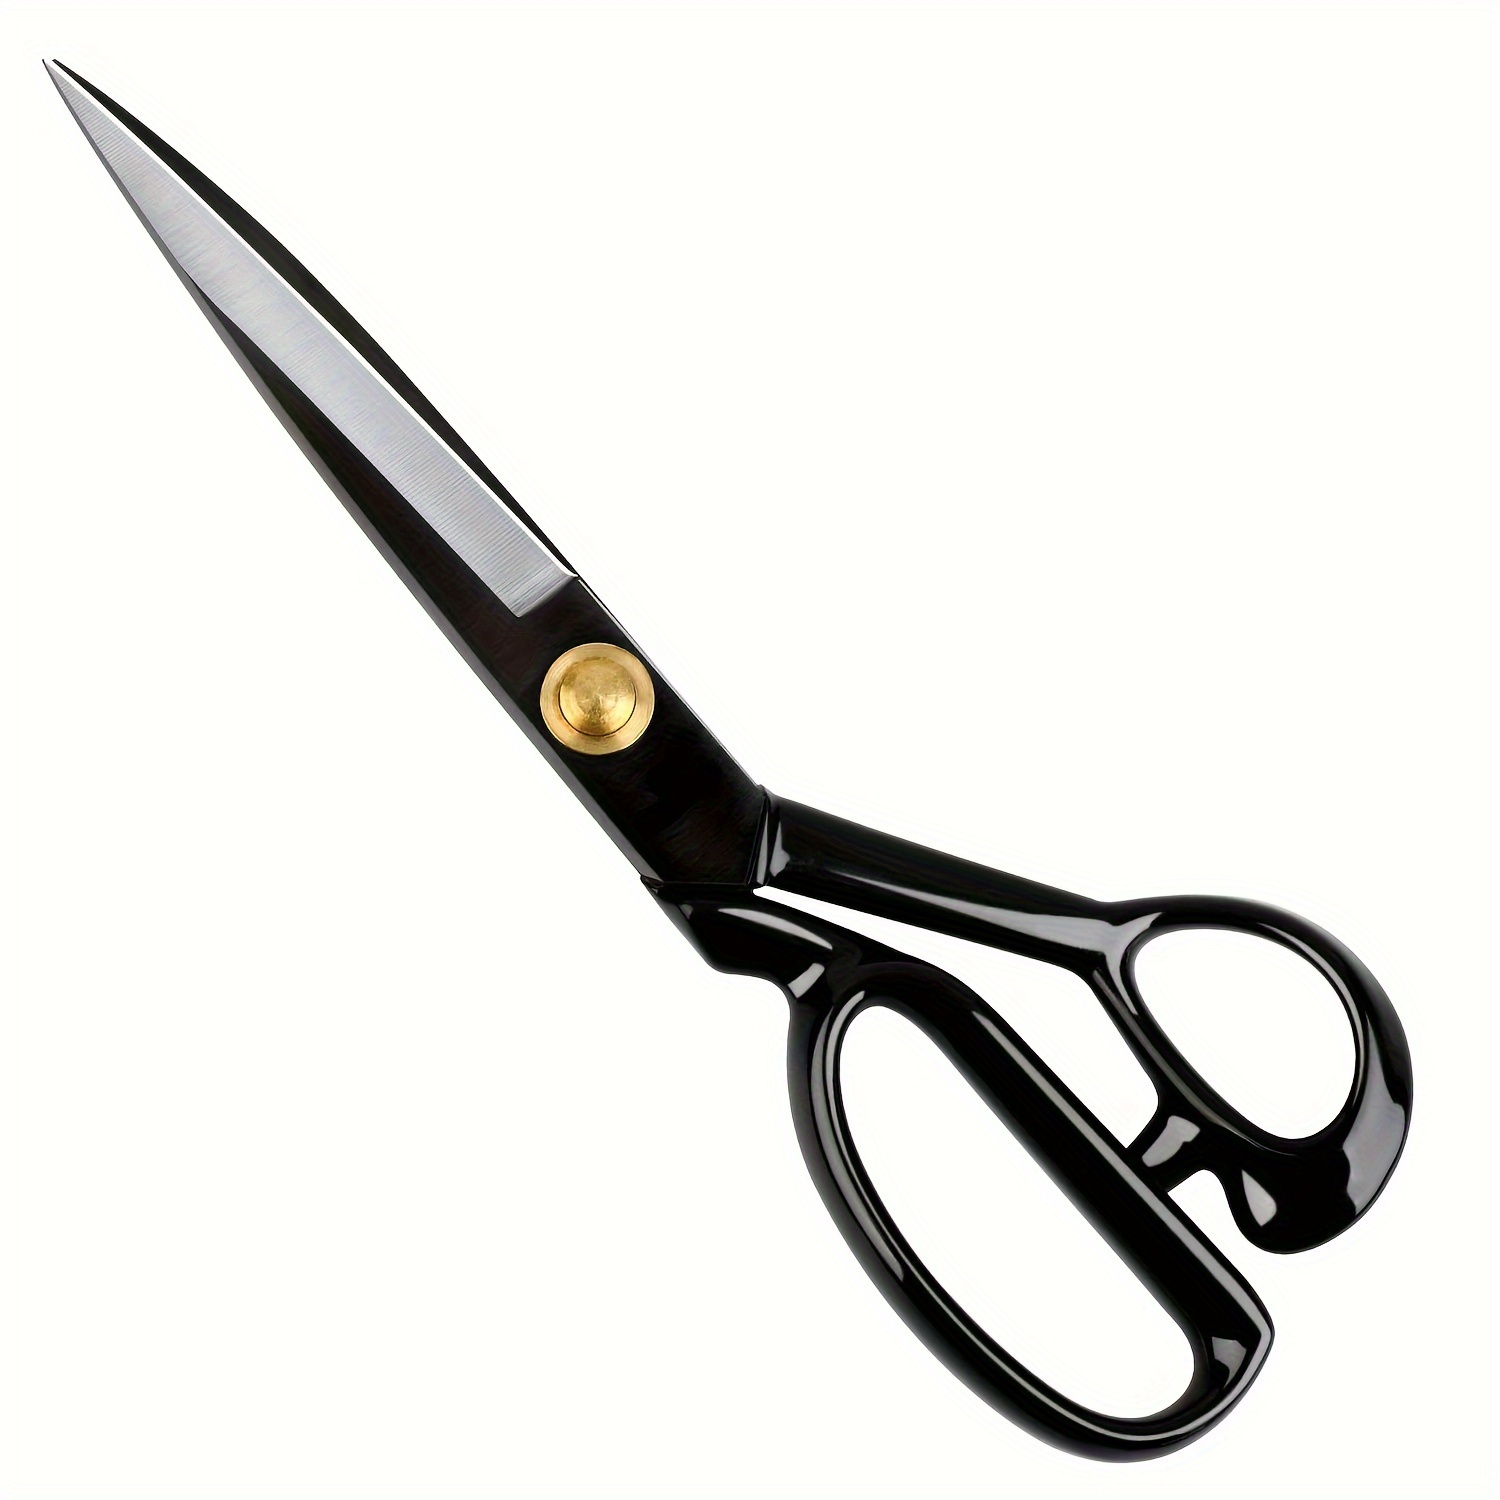  9 Pinking Shears Scissors for Fabric Zig Zag Serrated Edge Cut  & 8 Heavy Duty Titanium Scissors for Home/School/Office - All Purpose  Scissors for Sewing/Crafts/Arts/Leather/Paper, Ideal Sewing Gift : Arts,  Crafts